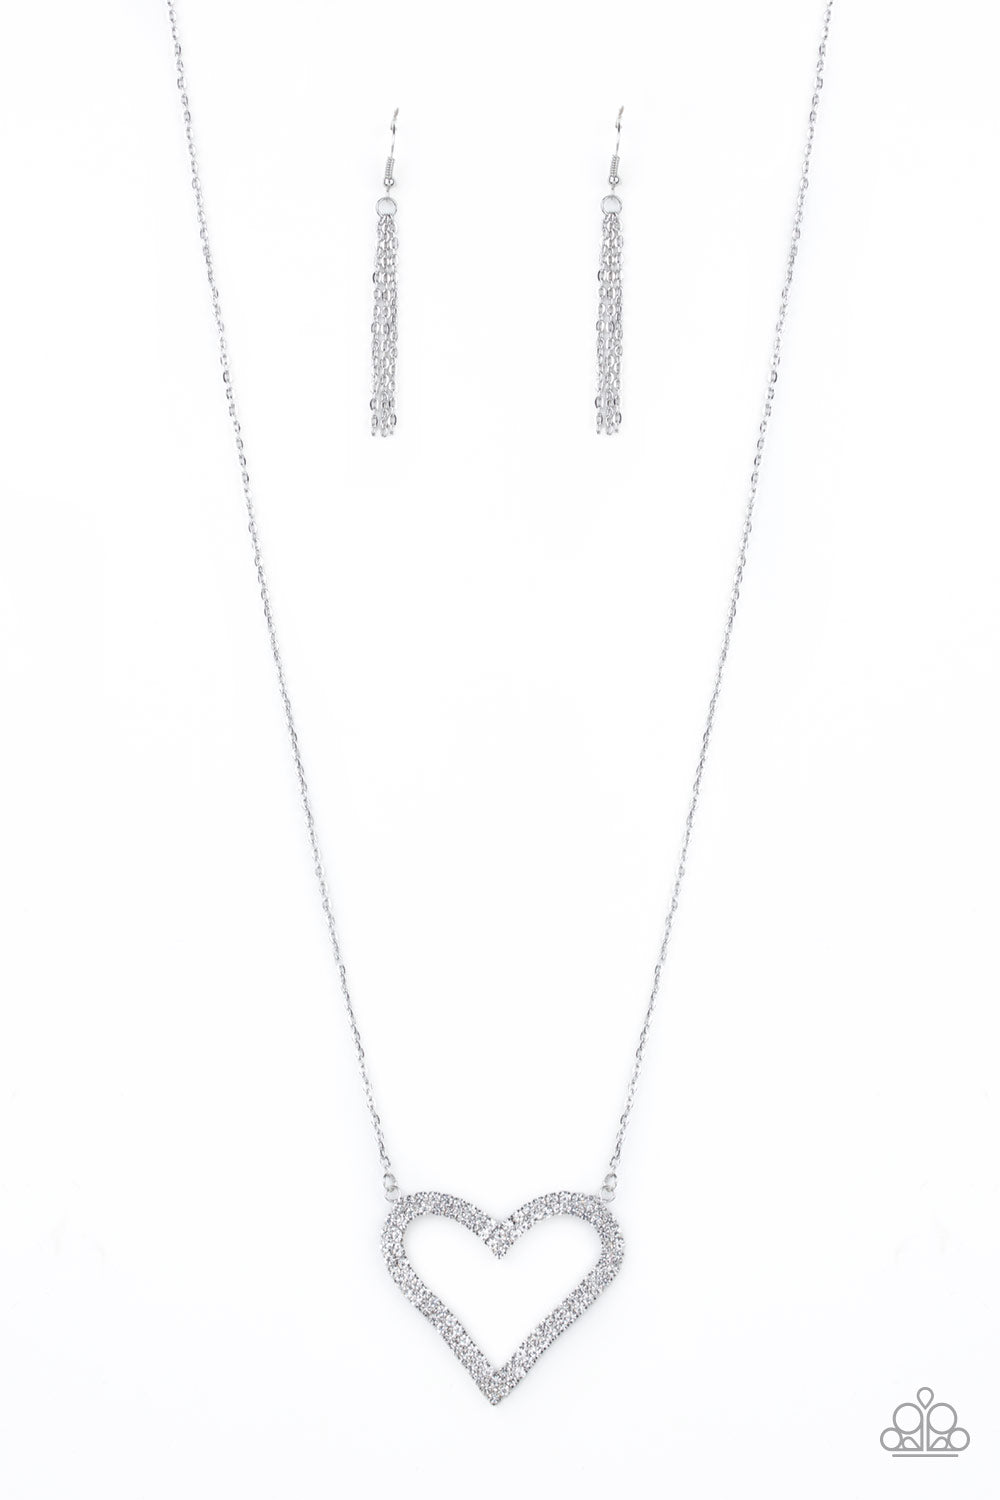 Paparazzi Accessories - Pull Some HEART-strings - White